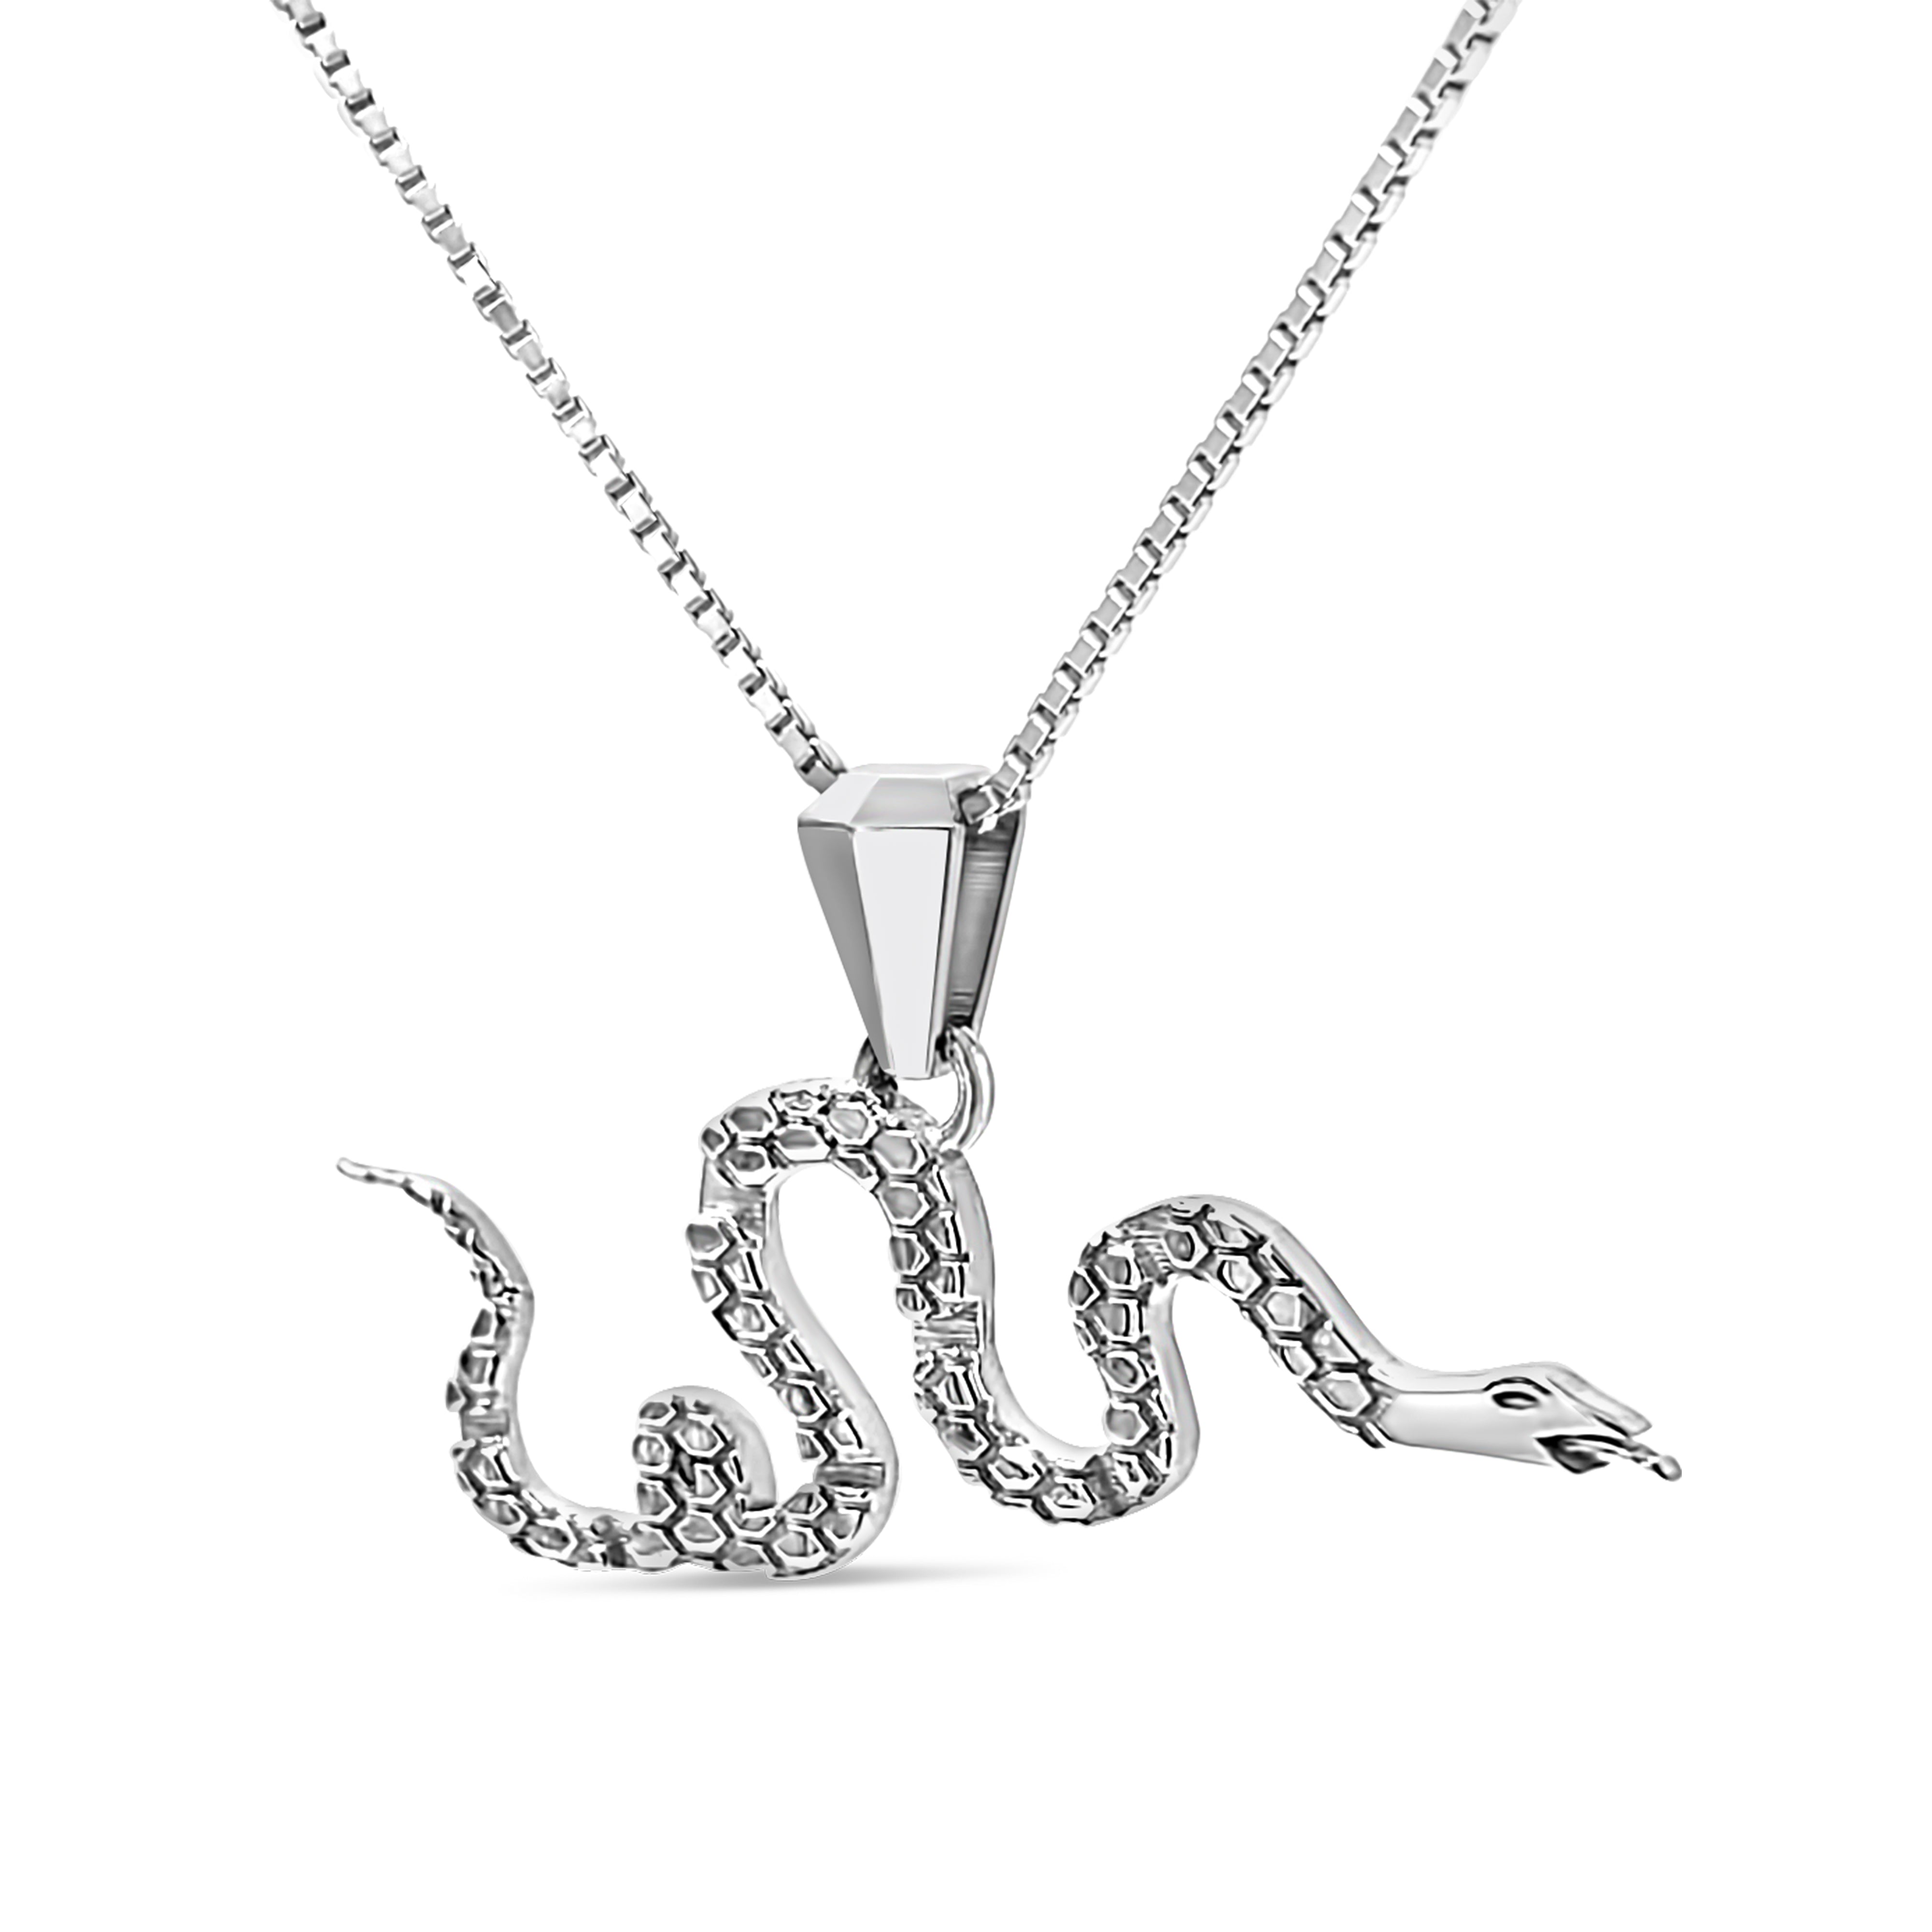 Join or Die Snake Necklace – Joe Wall Jewelry